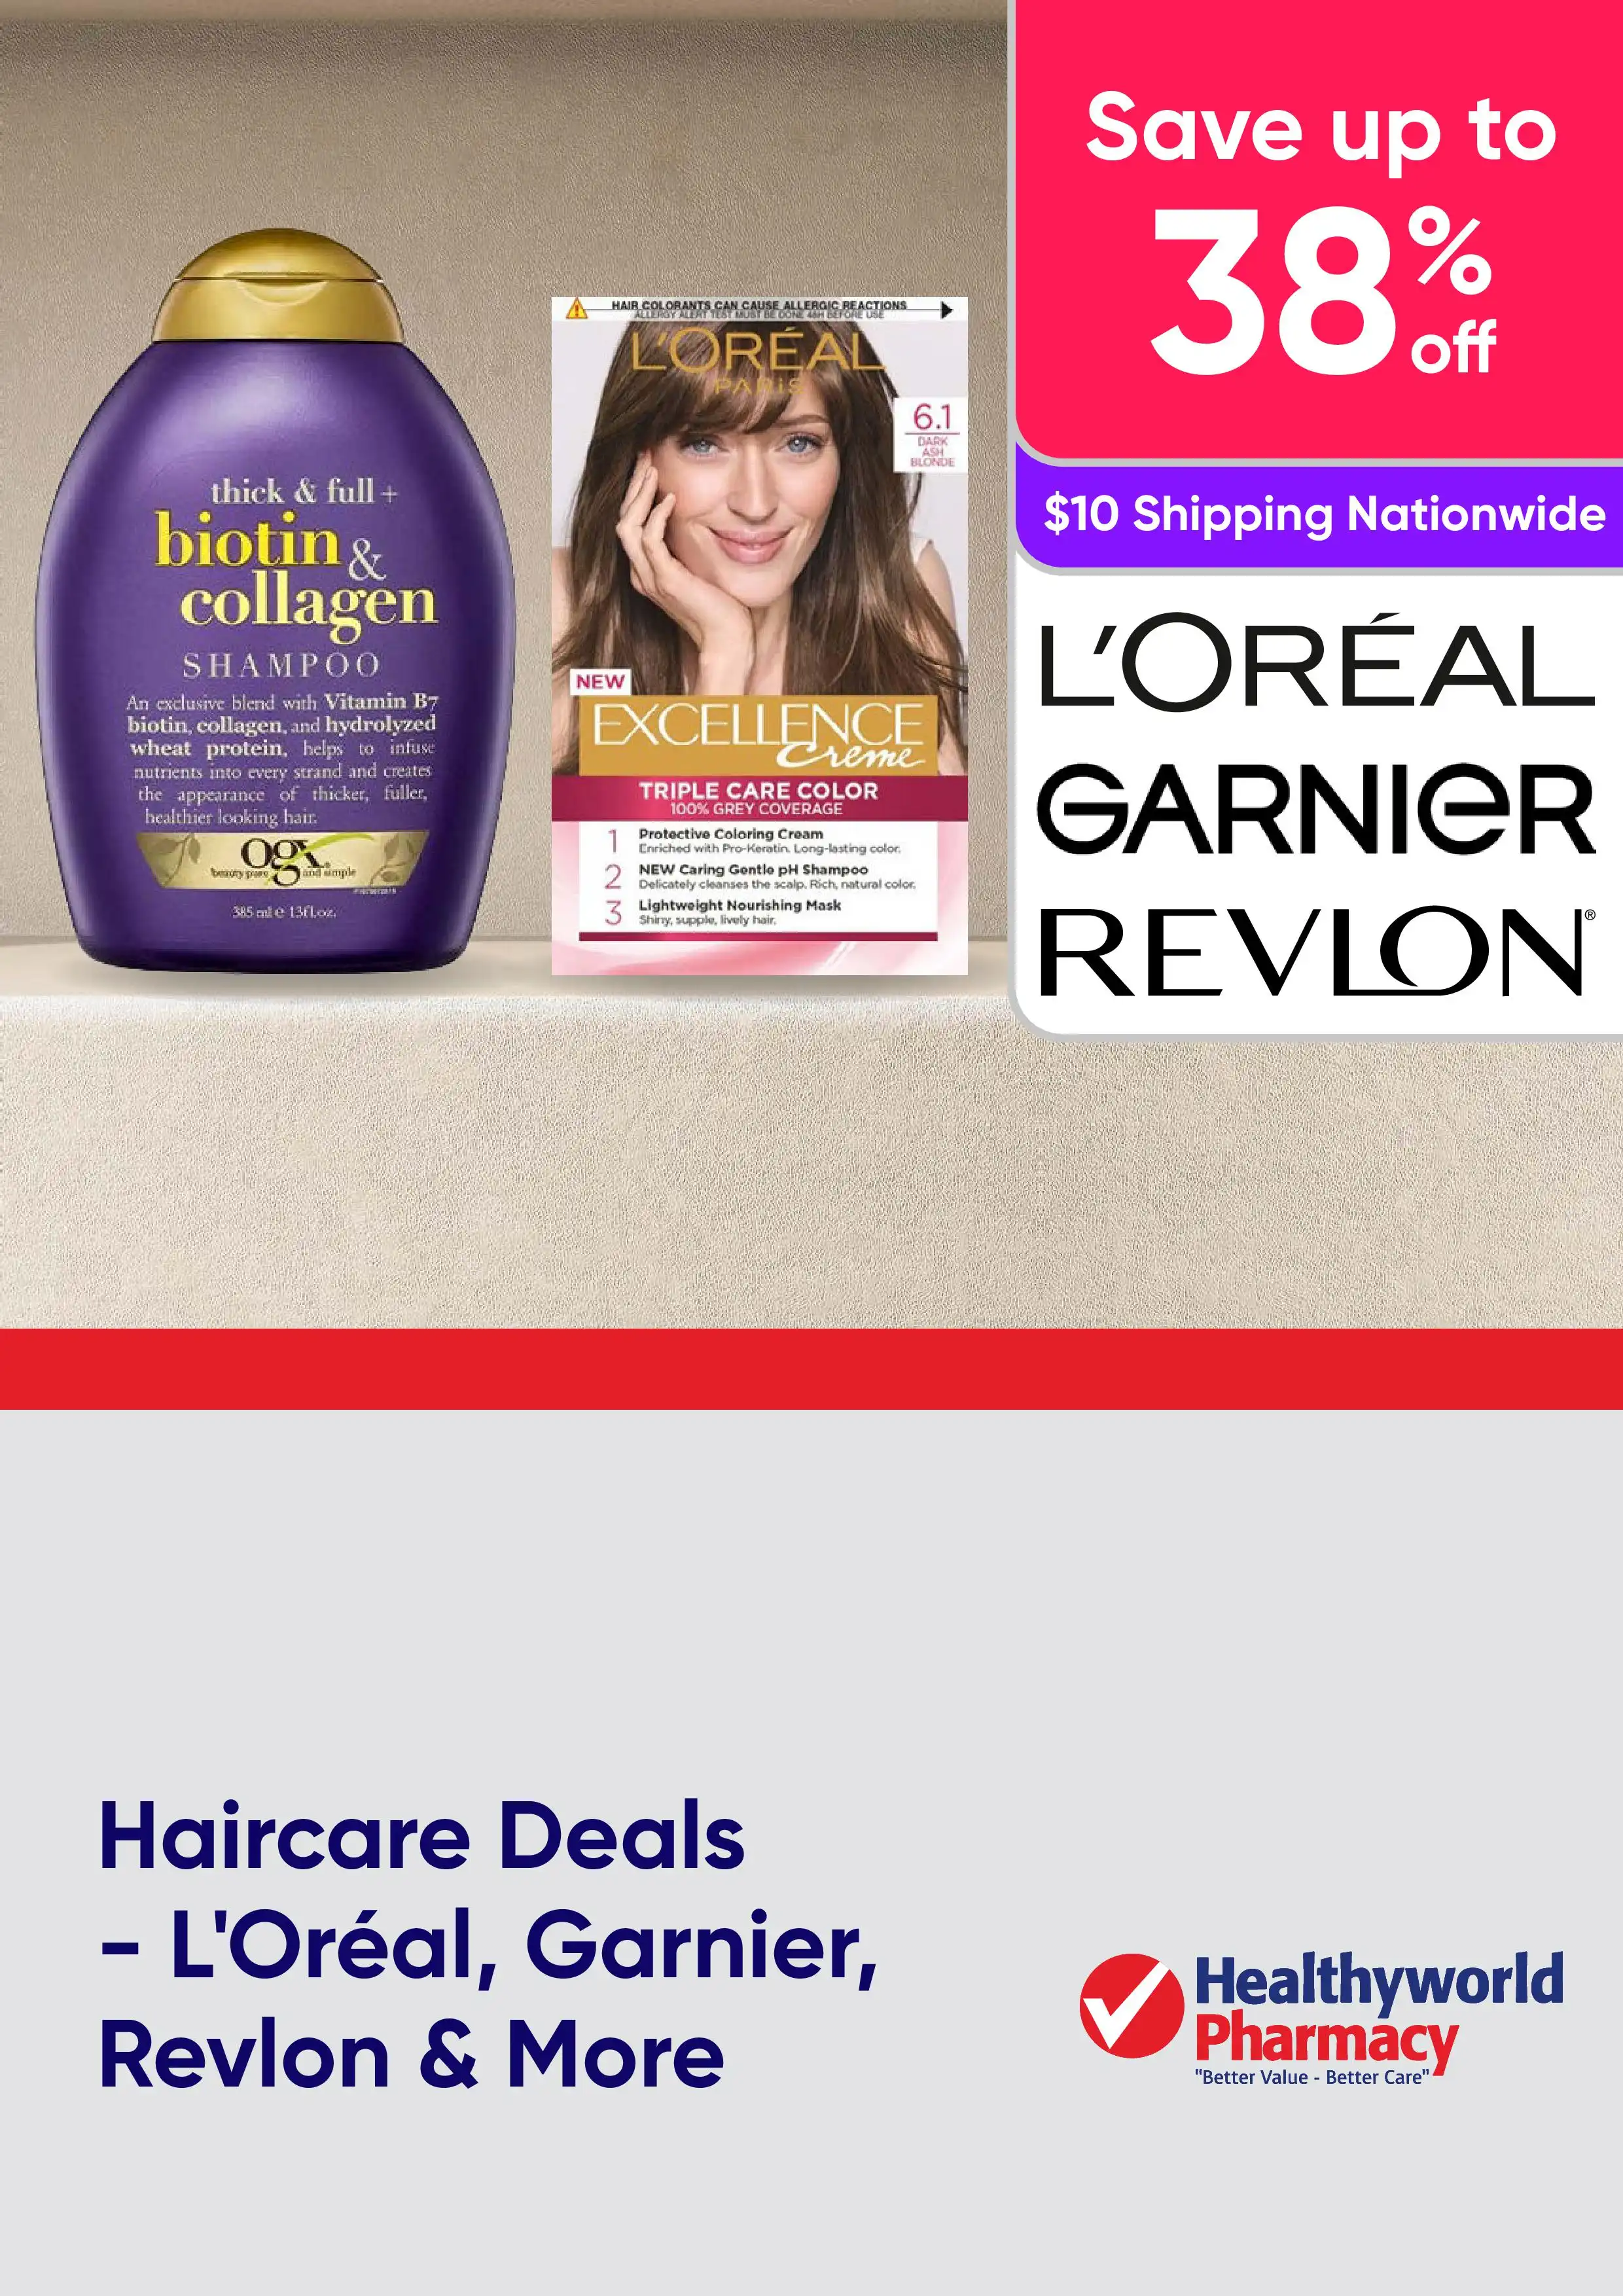 Haircare Deals - Save up to 38% off L'Oreal, Garnier, Revlon & more